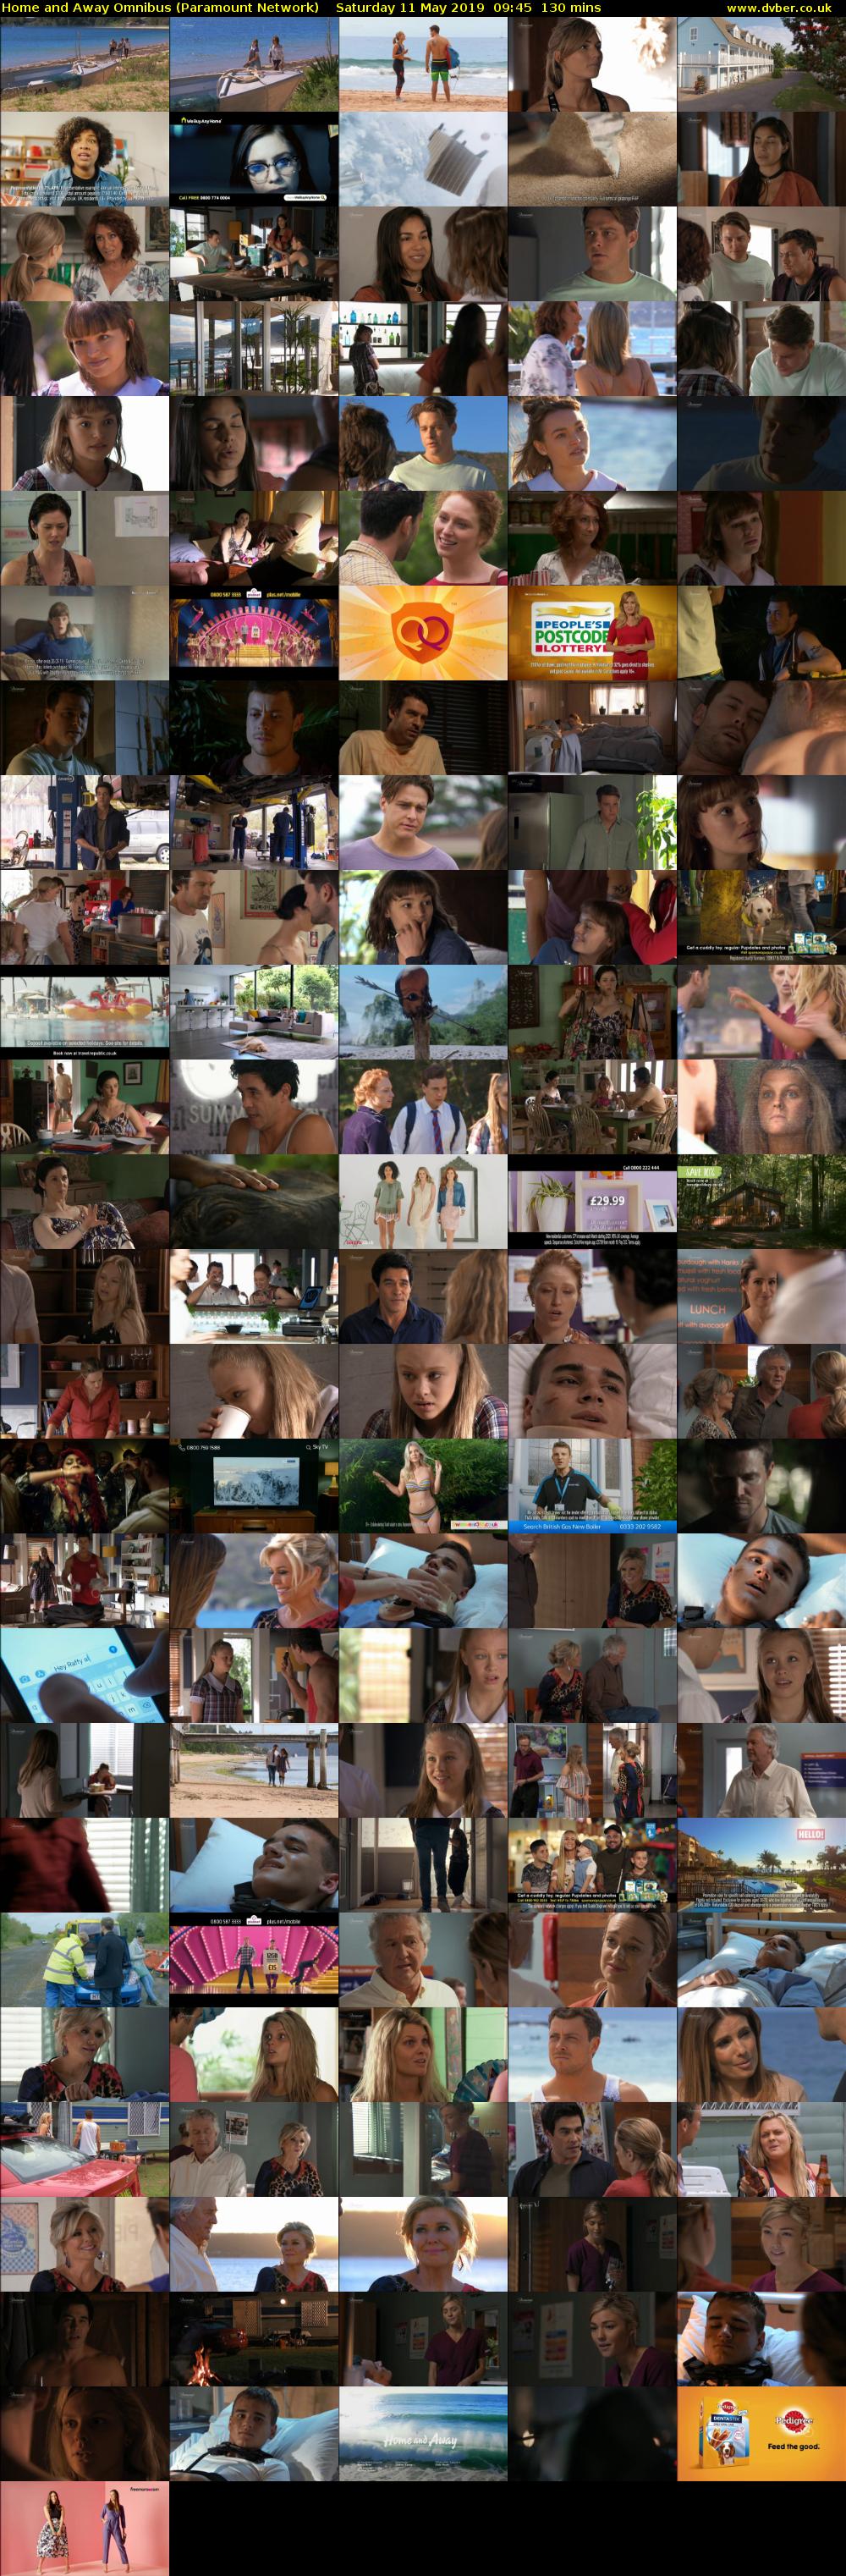 Home and Away Omnibus (Paramount Network) Saturday 11 May 2019 09:45 - 11:55